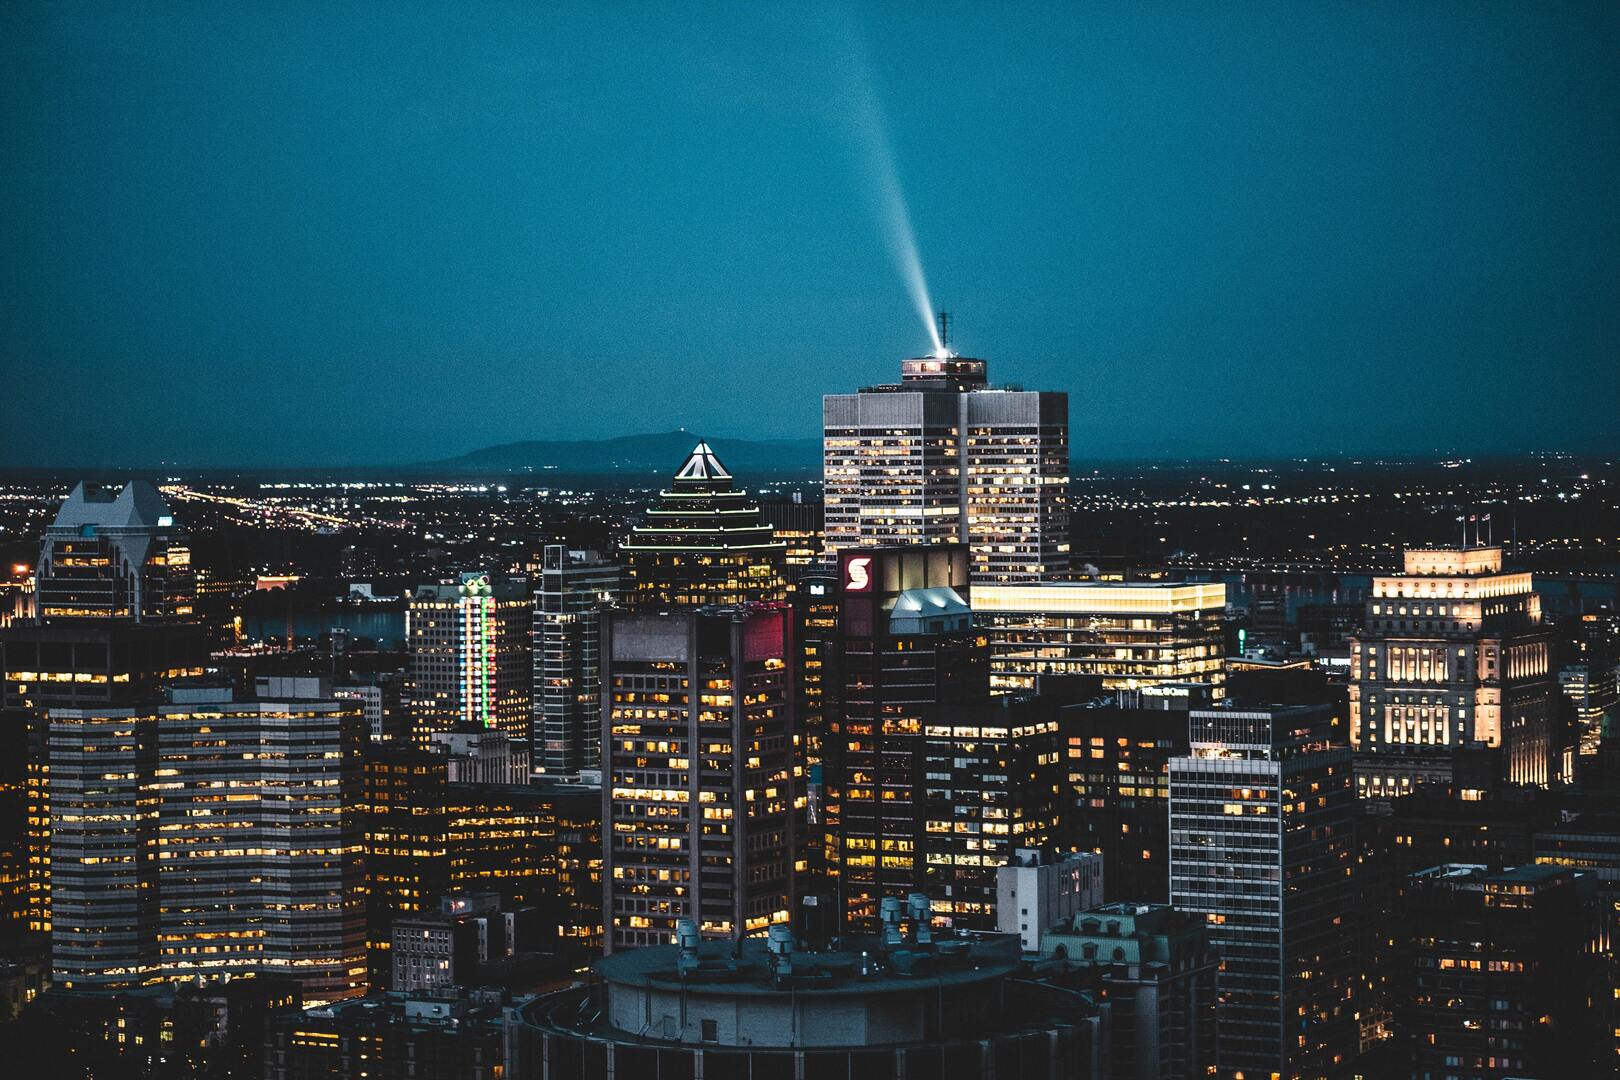 Background picture of the Montreal skyline at night